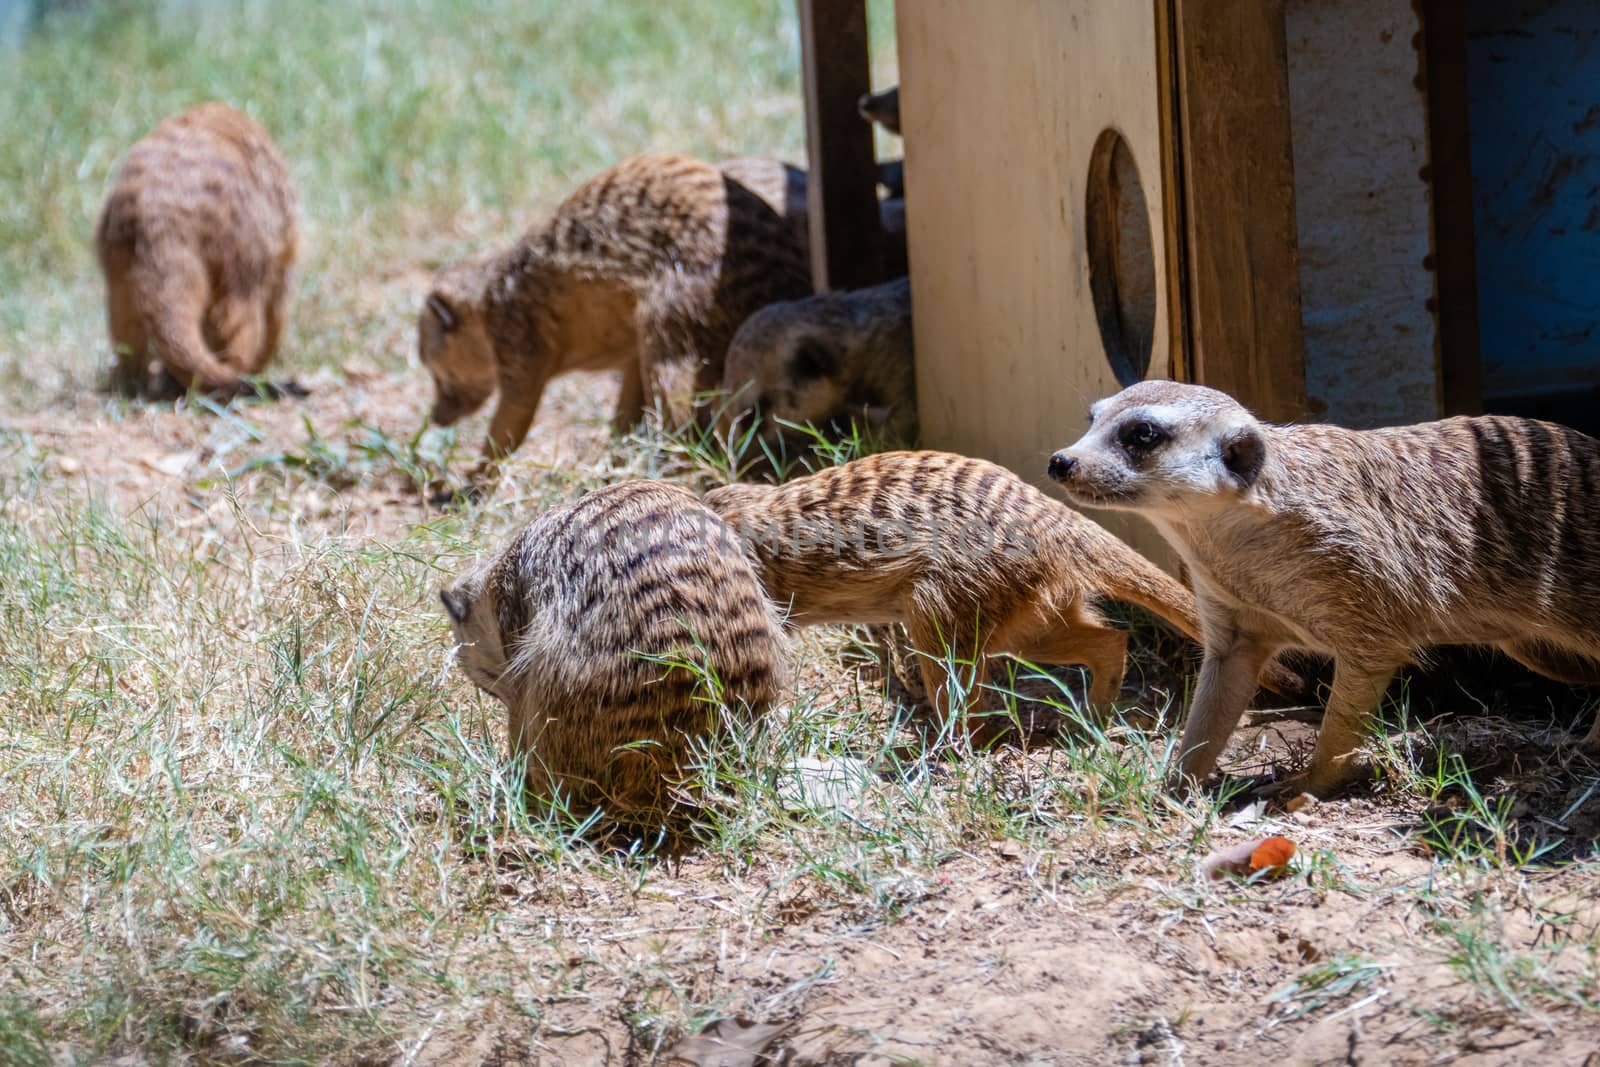 Family of meerkats around home by imagesbykenny